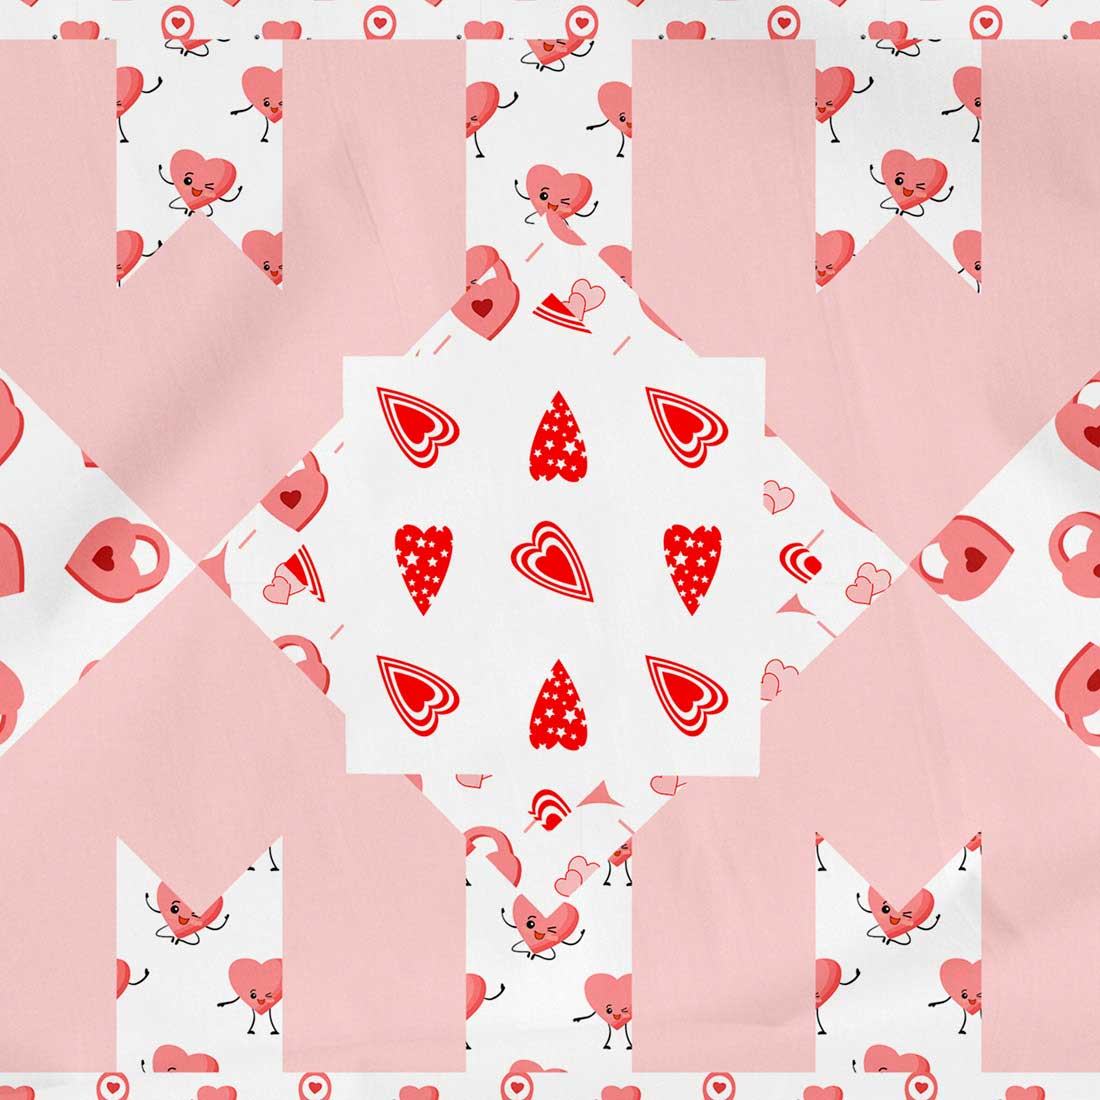 Compilation of images of irresistible patterns with hearts.